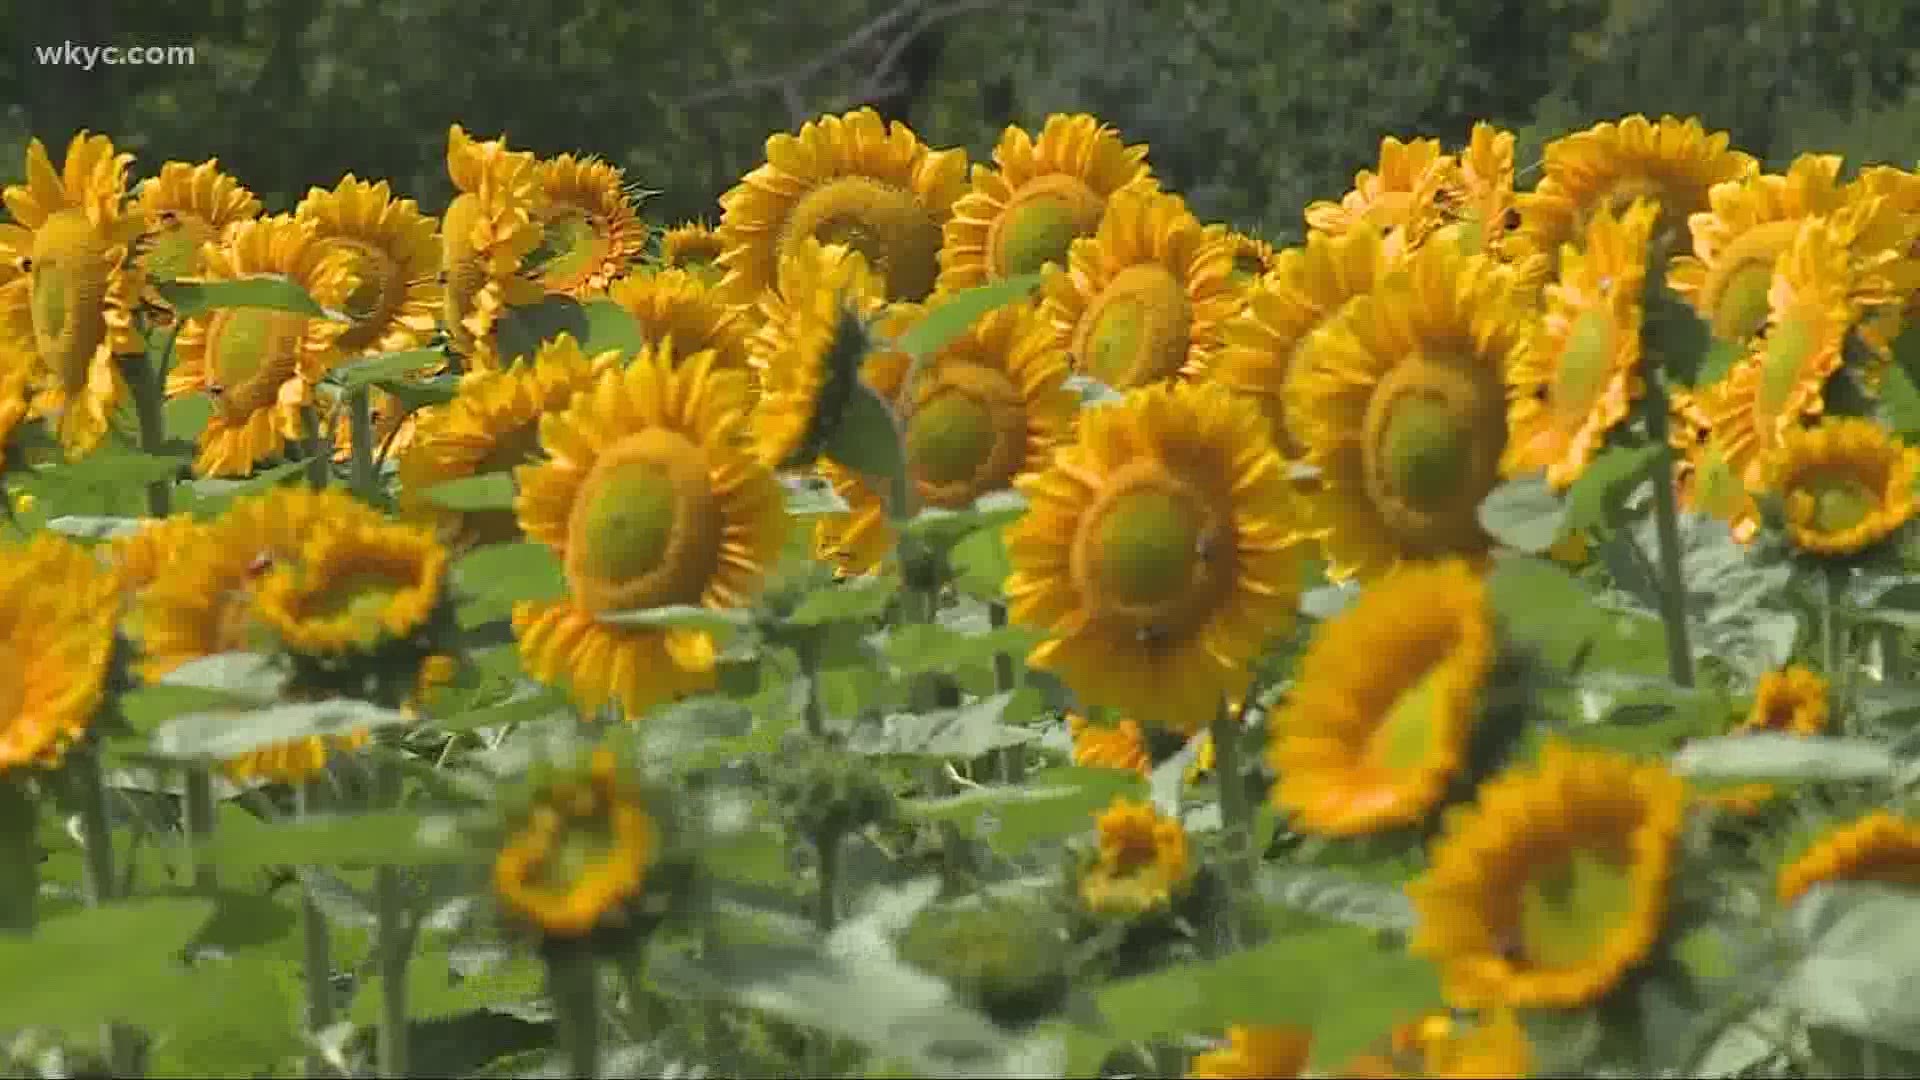 Sunflowers join other pick/harvest your own fruits and vegetables as farms adapt in difficult economy. Carl Bachtel headed out to Chesterland to see more.